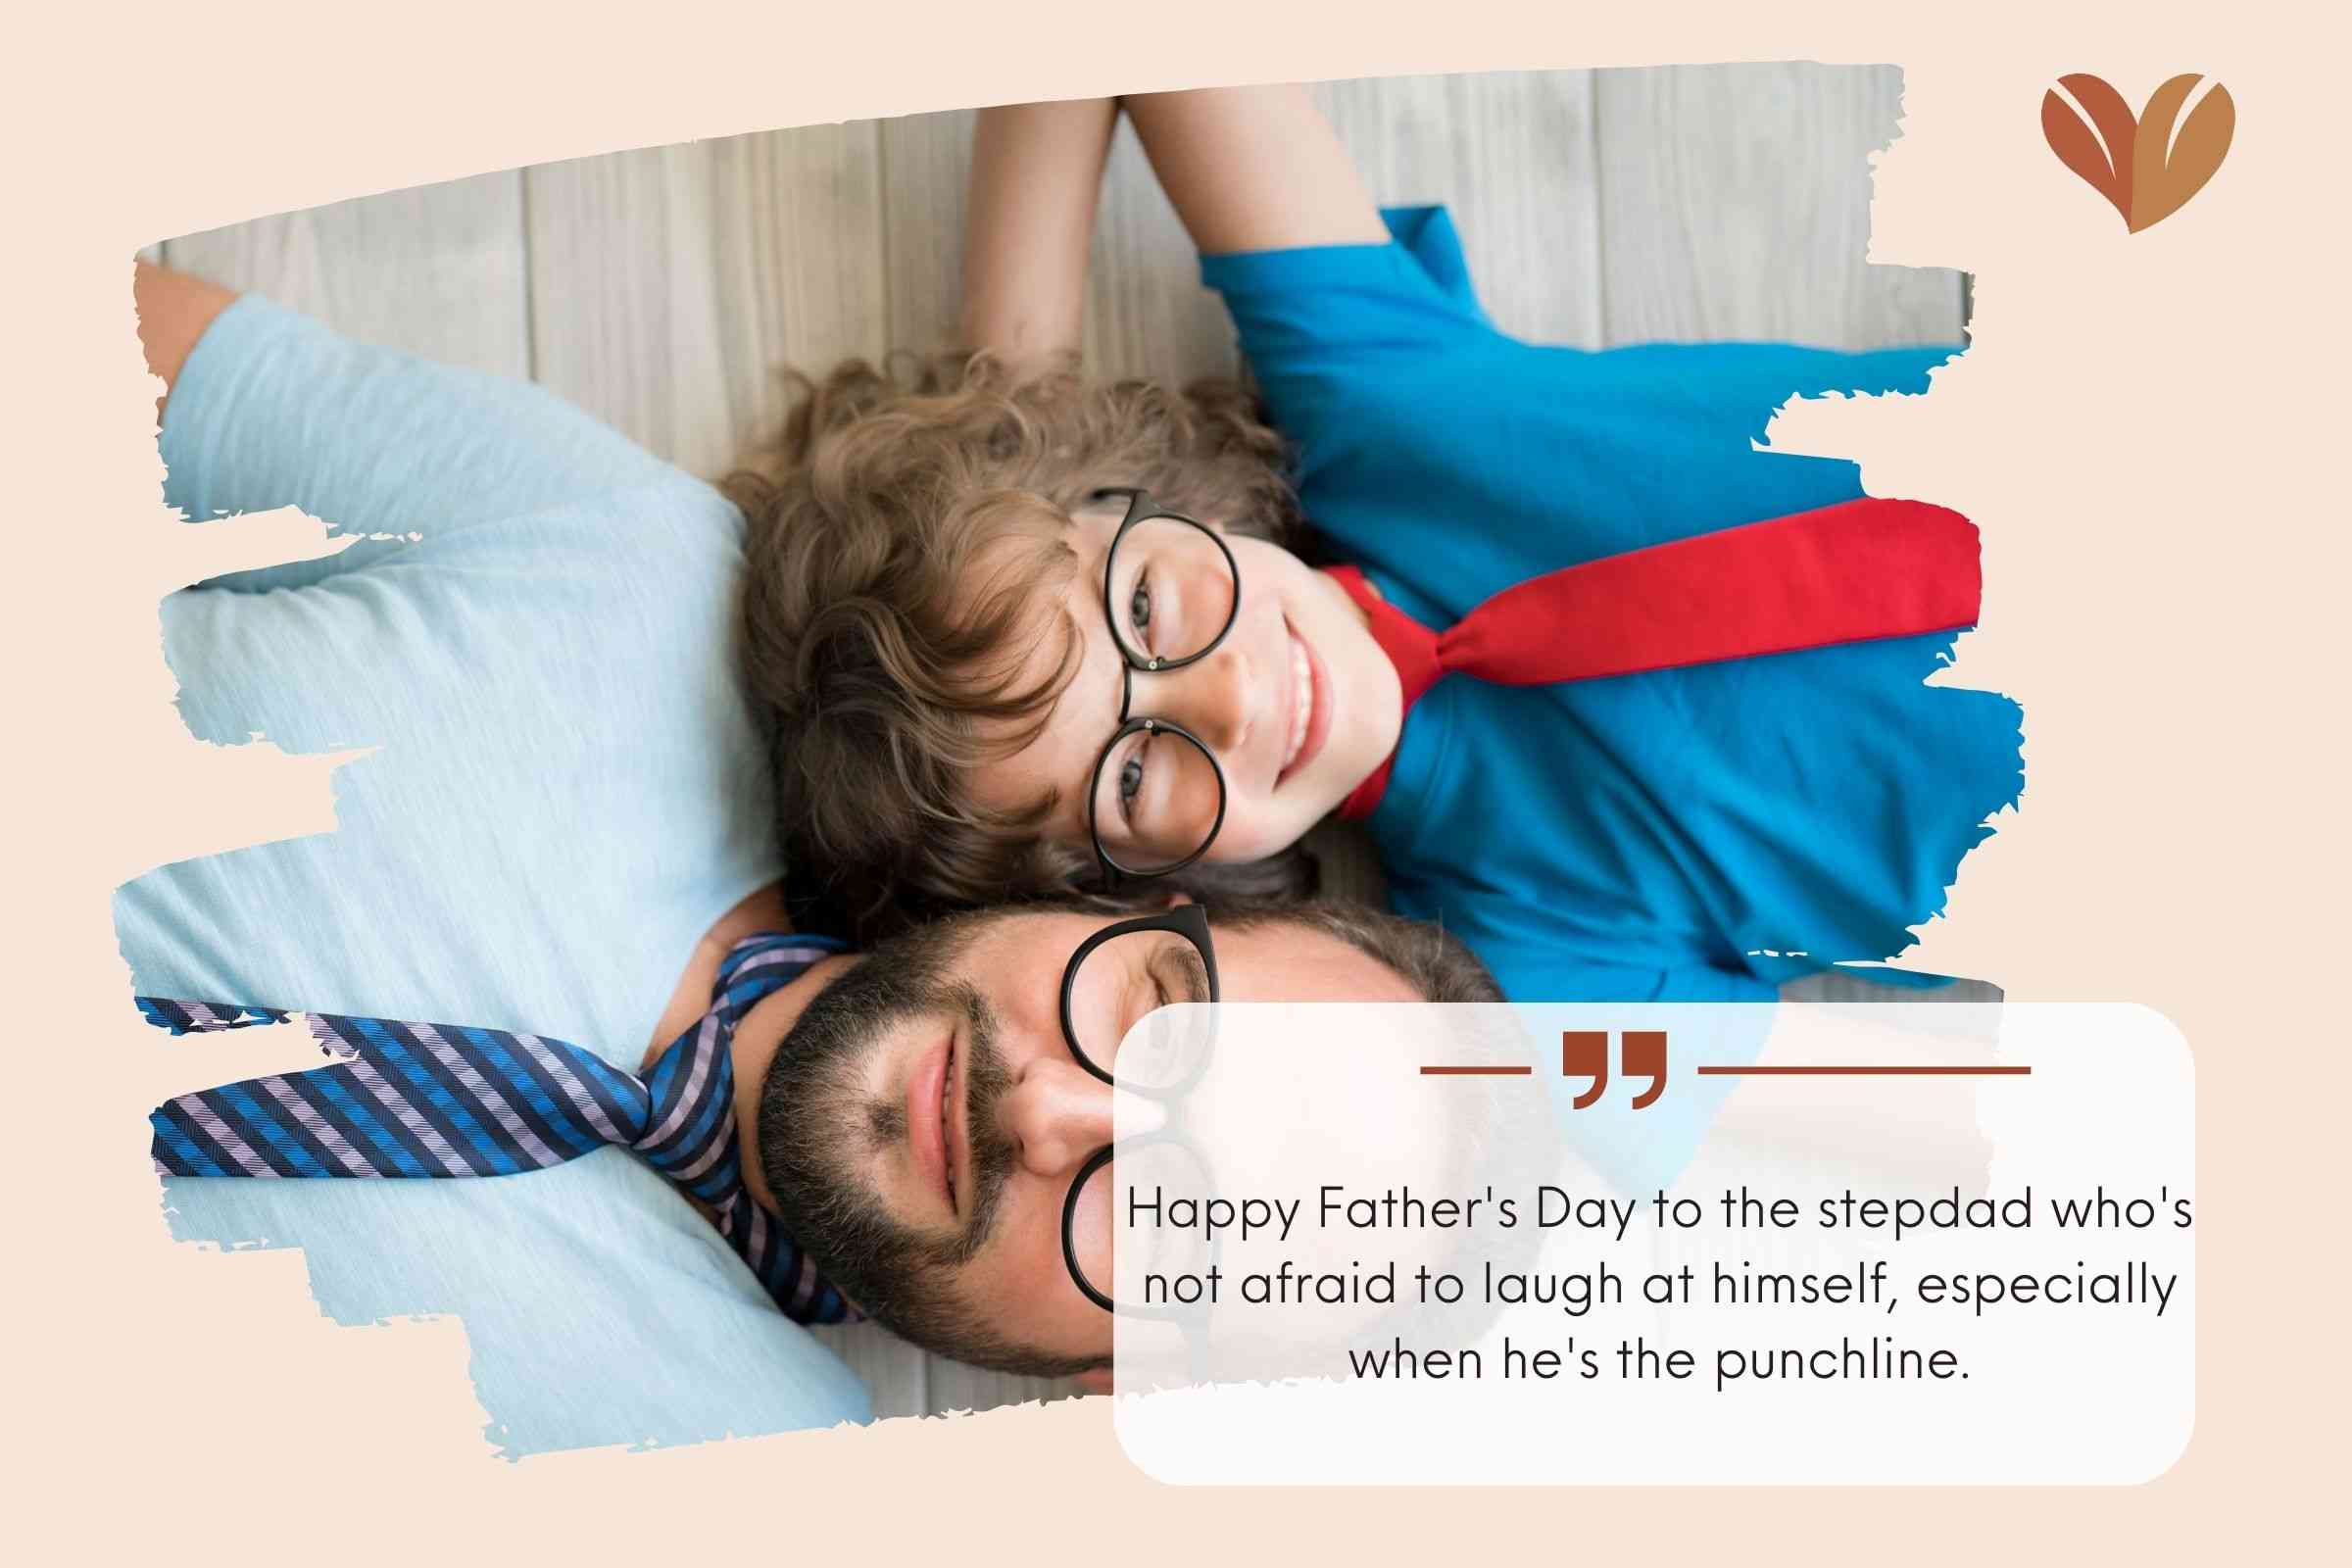 Heartfelt Father's Day Messages for Stepdad: Making Every Moment Count